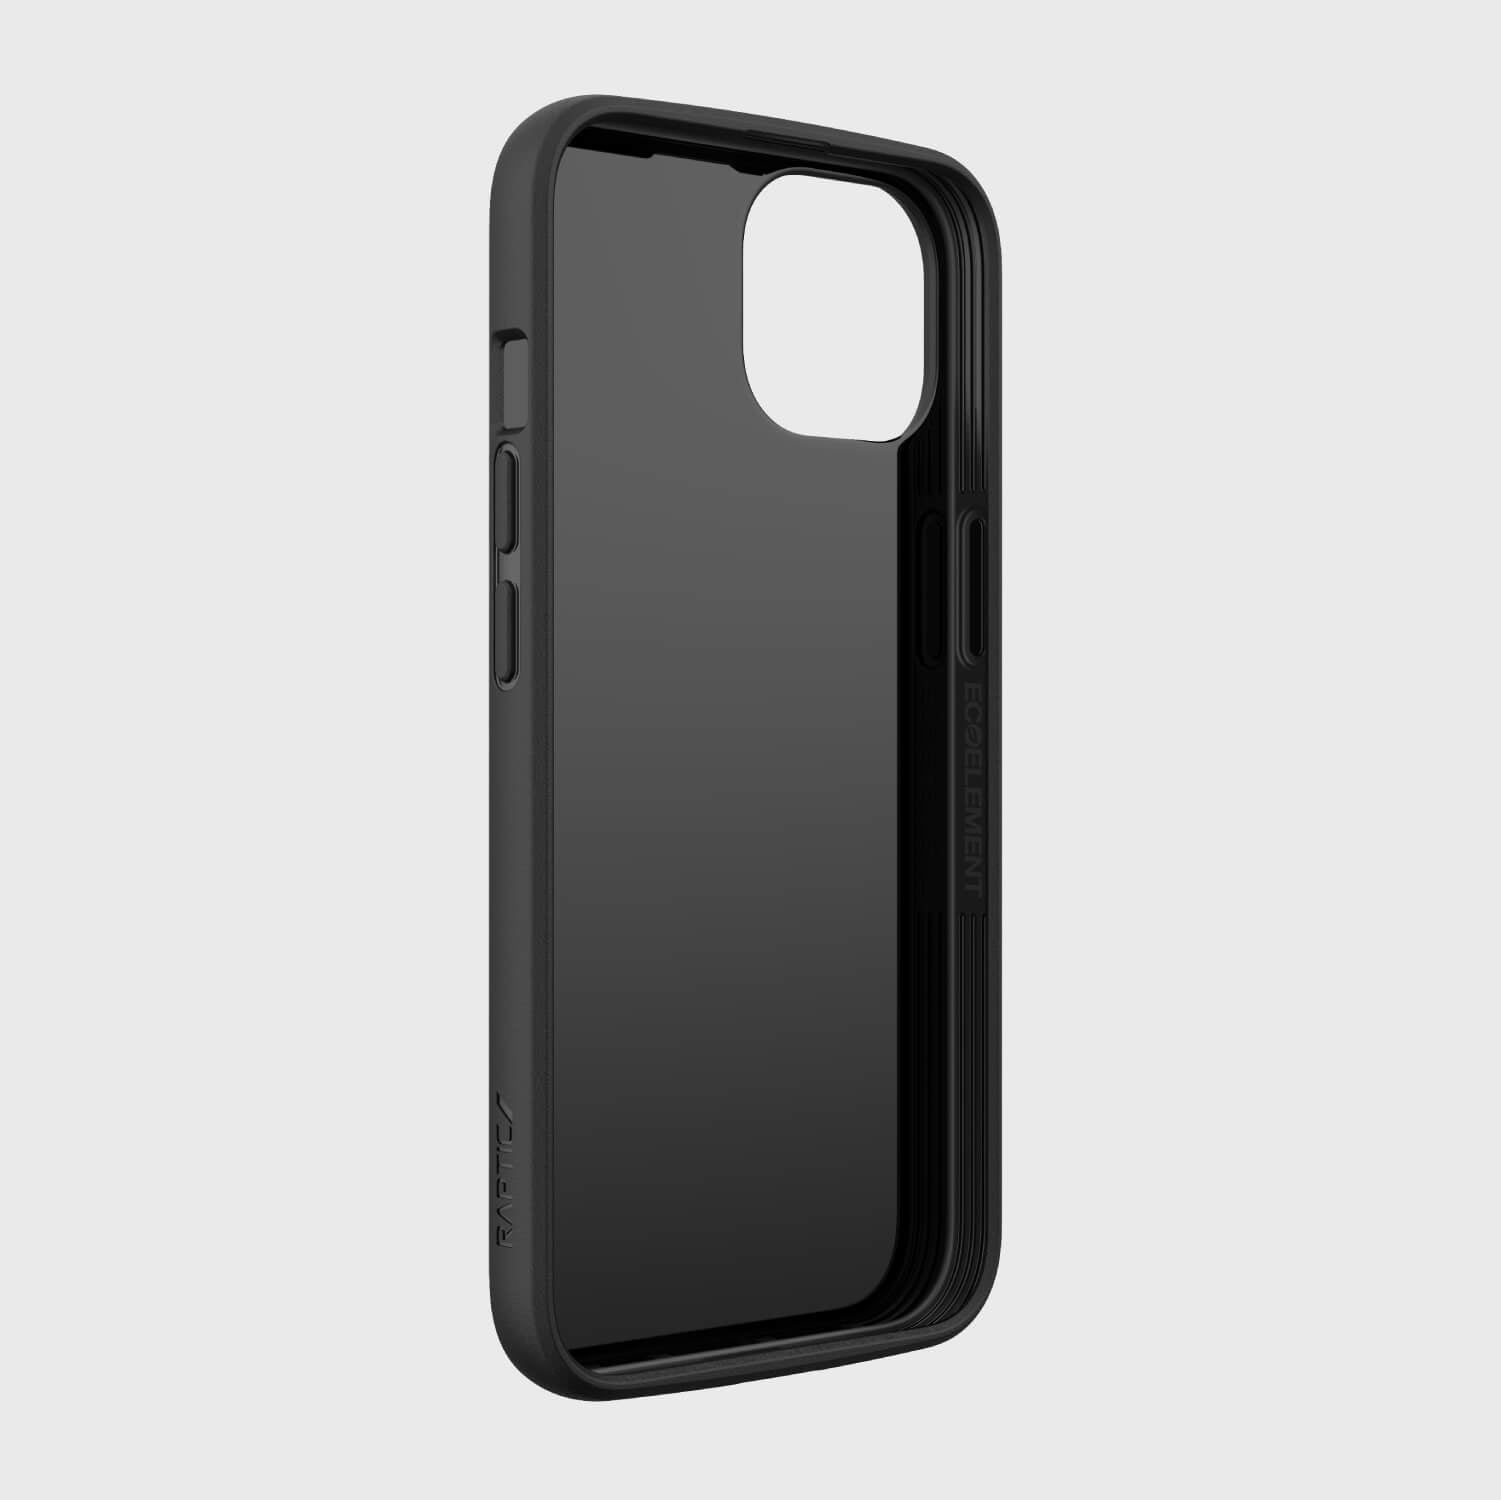 A slim black iPhone 14 case - Raptic Slim with texturing depth on a white background.